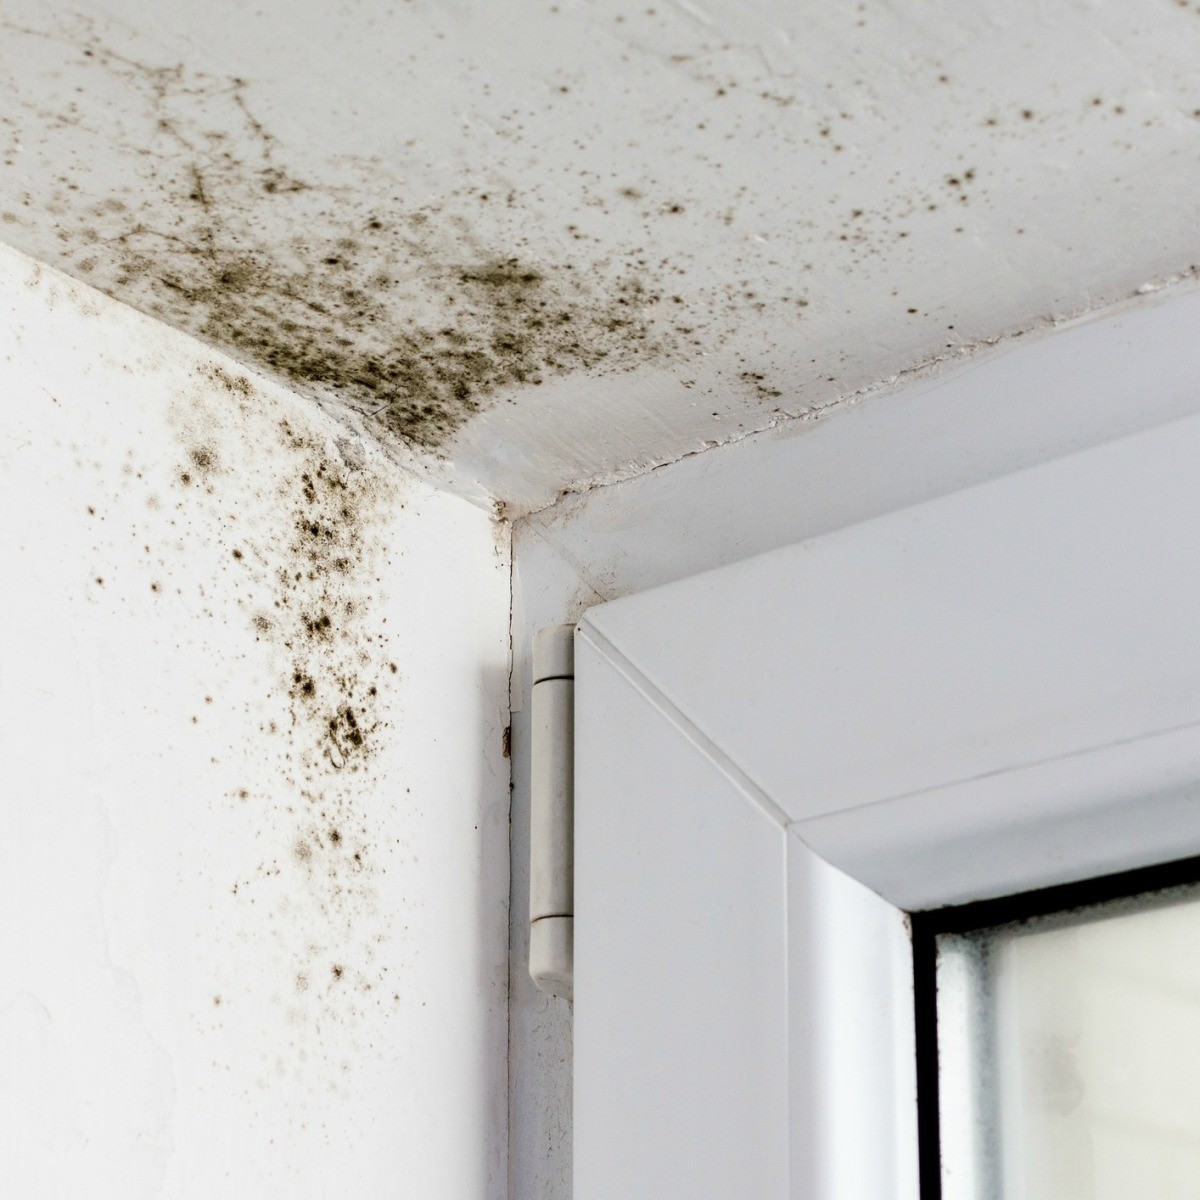 Cause of Mold Growth in a Mobile Home?